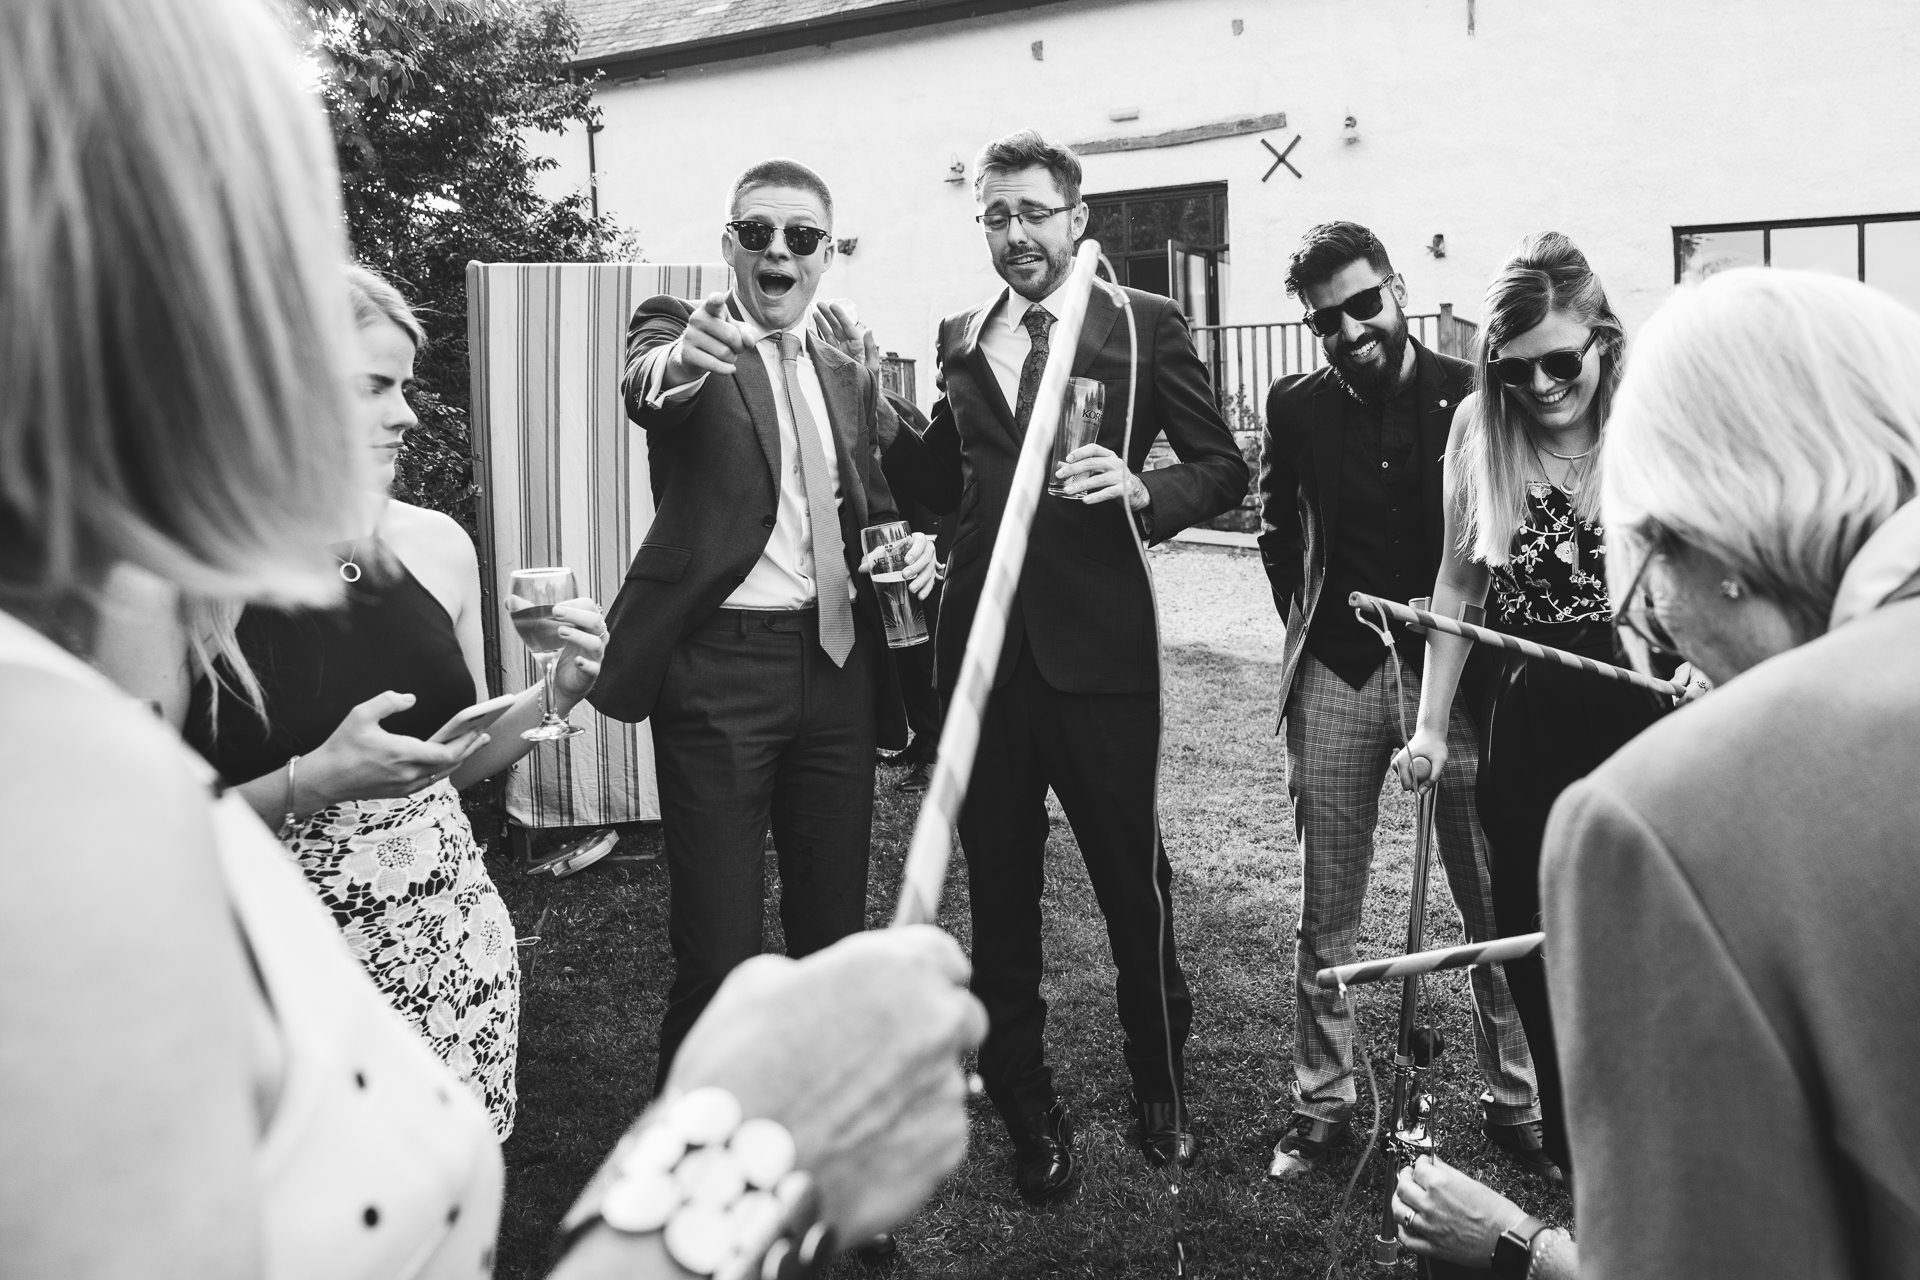 Wedding guests playing village fete games